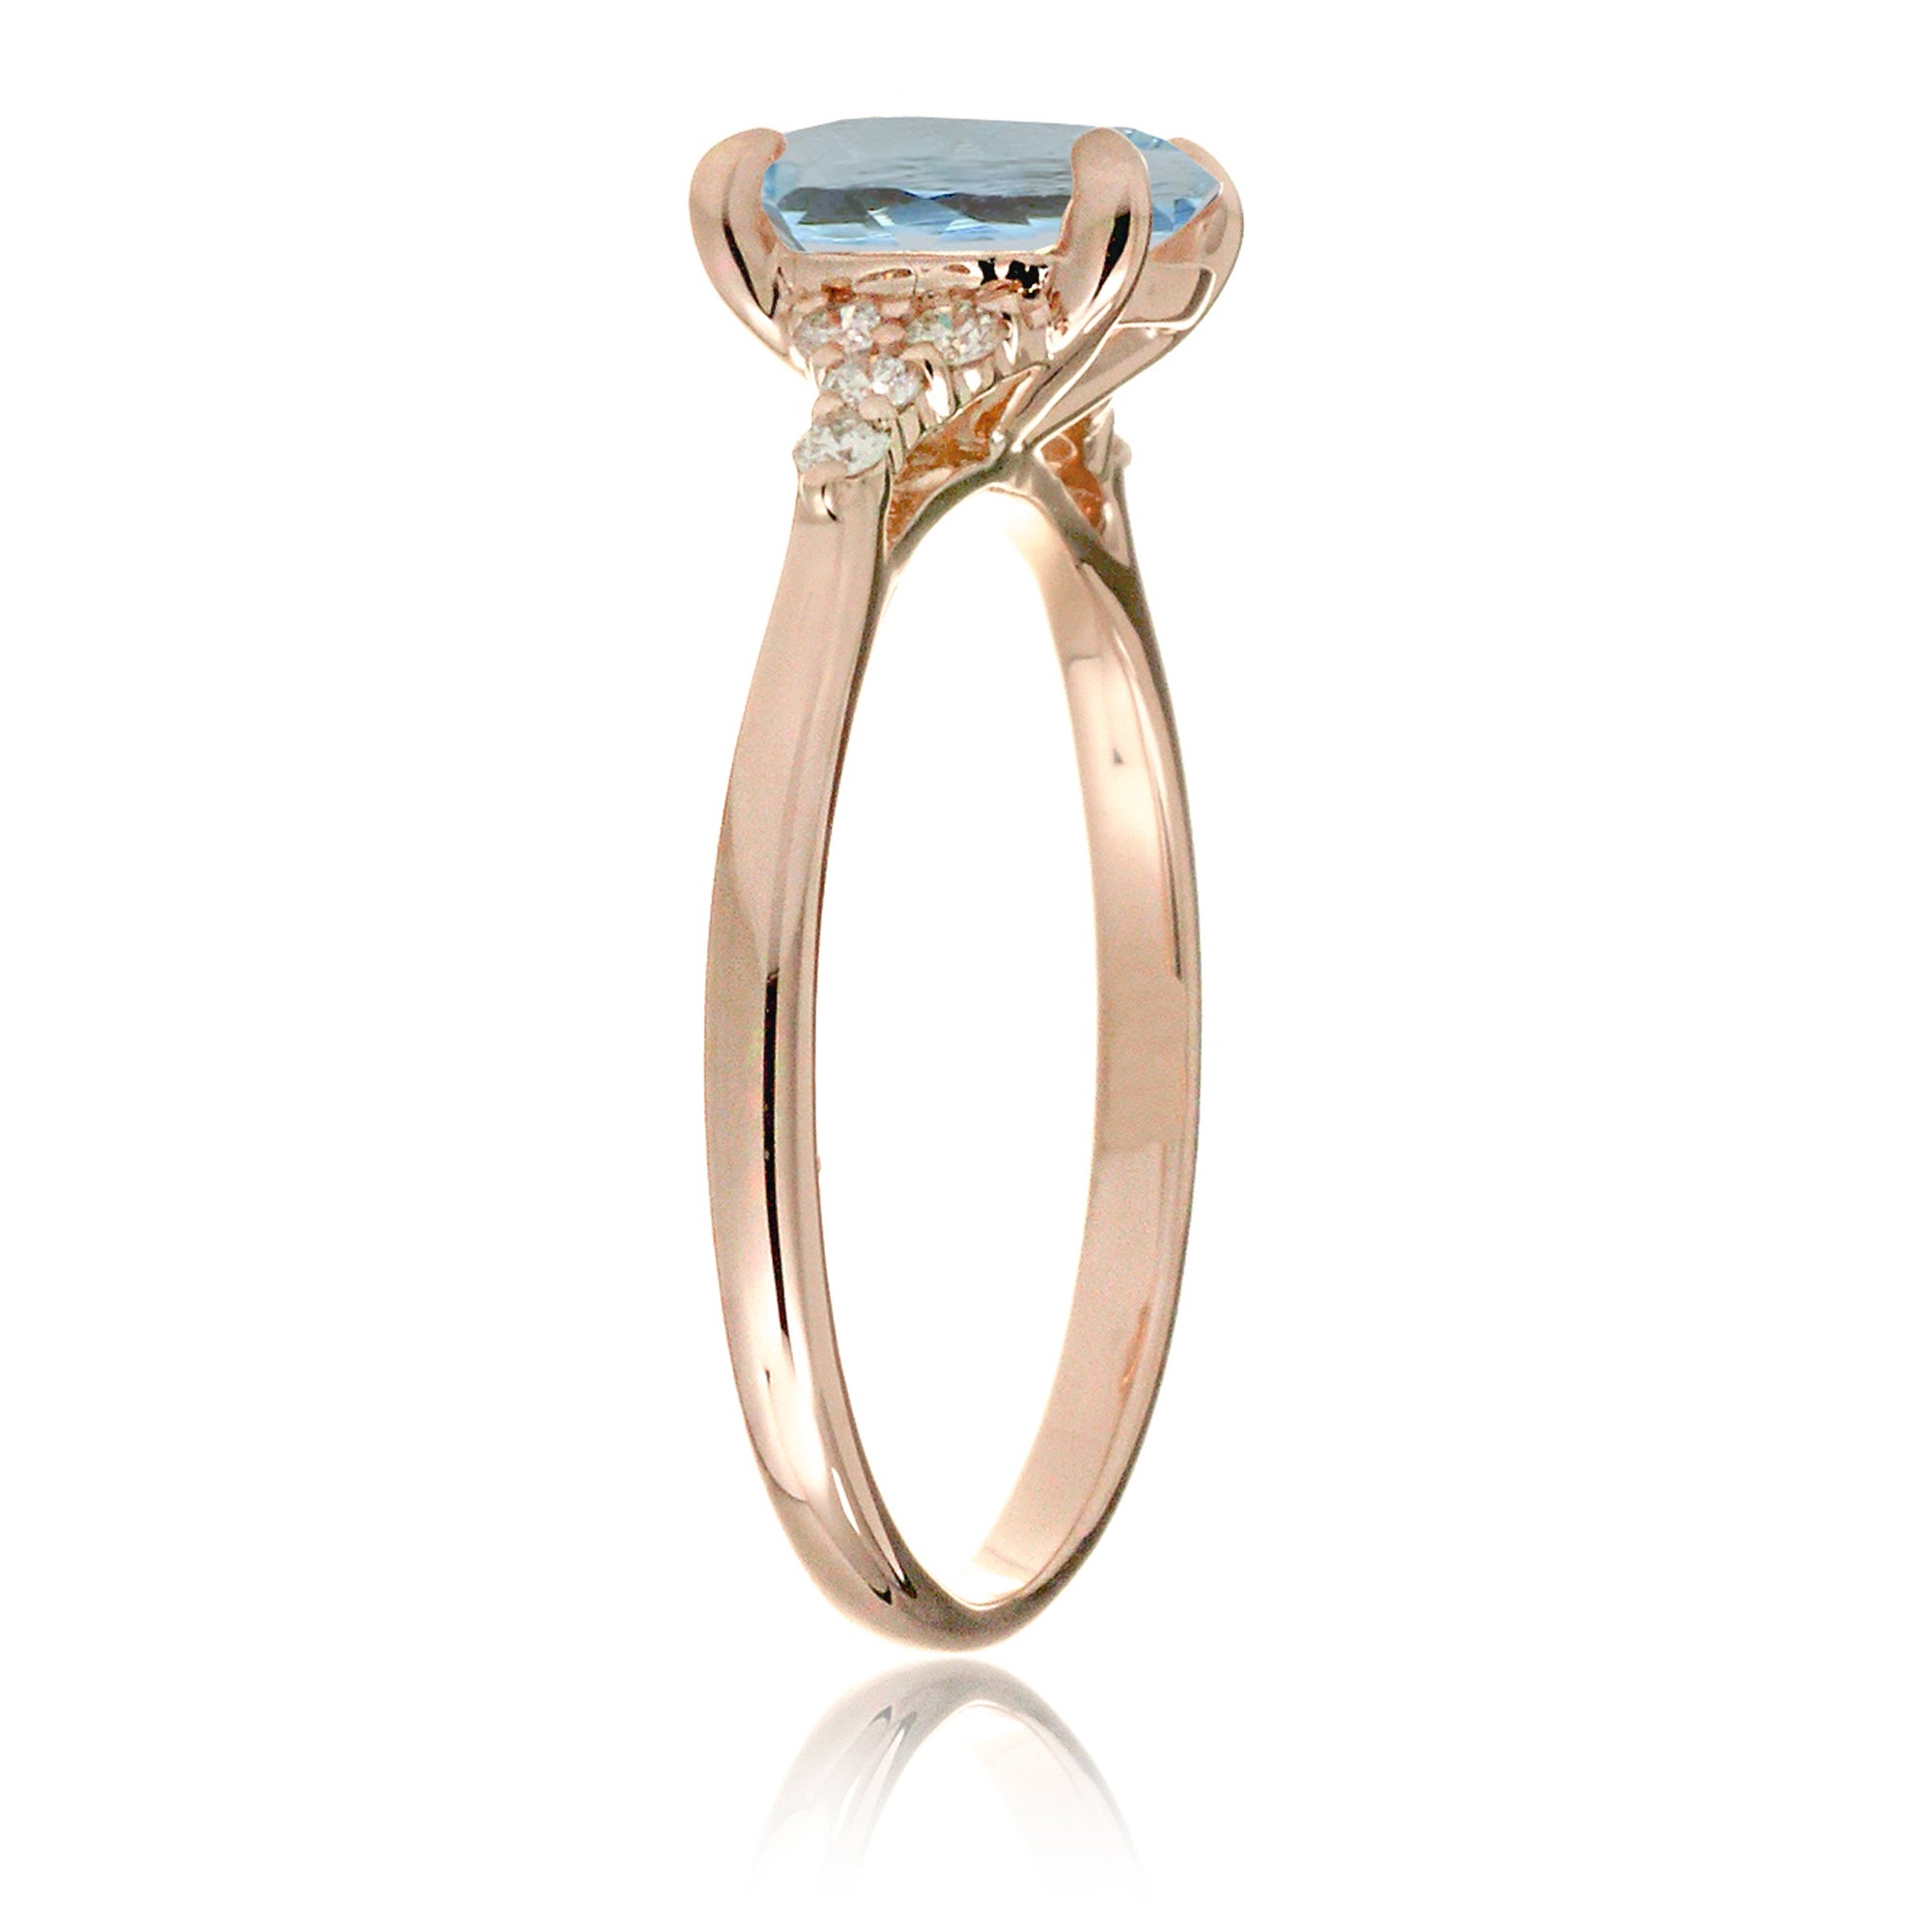 Oval aquamarine ring in rose gold with side diamonds all natural - the Chloe ring